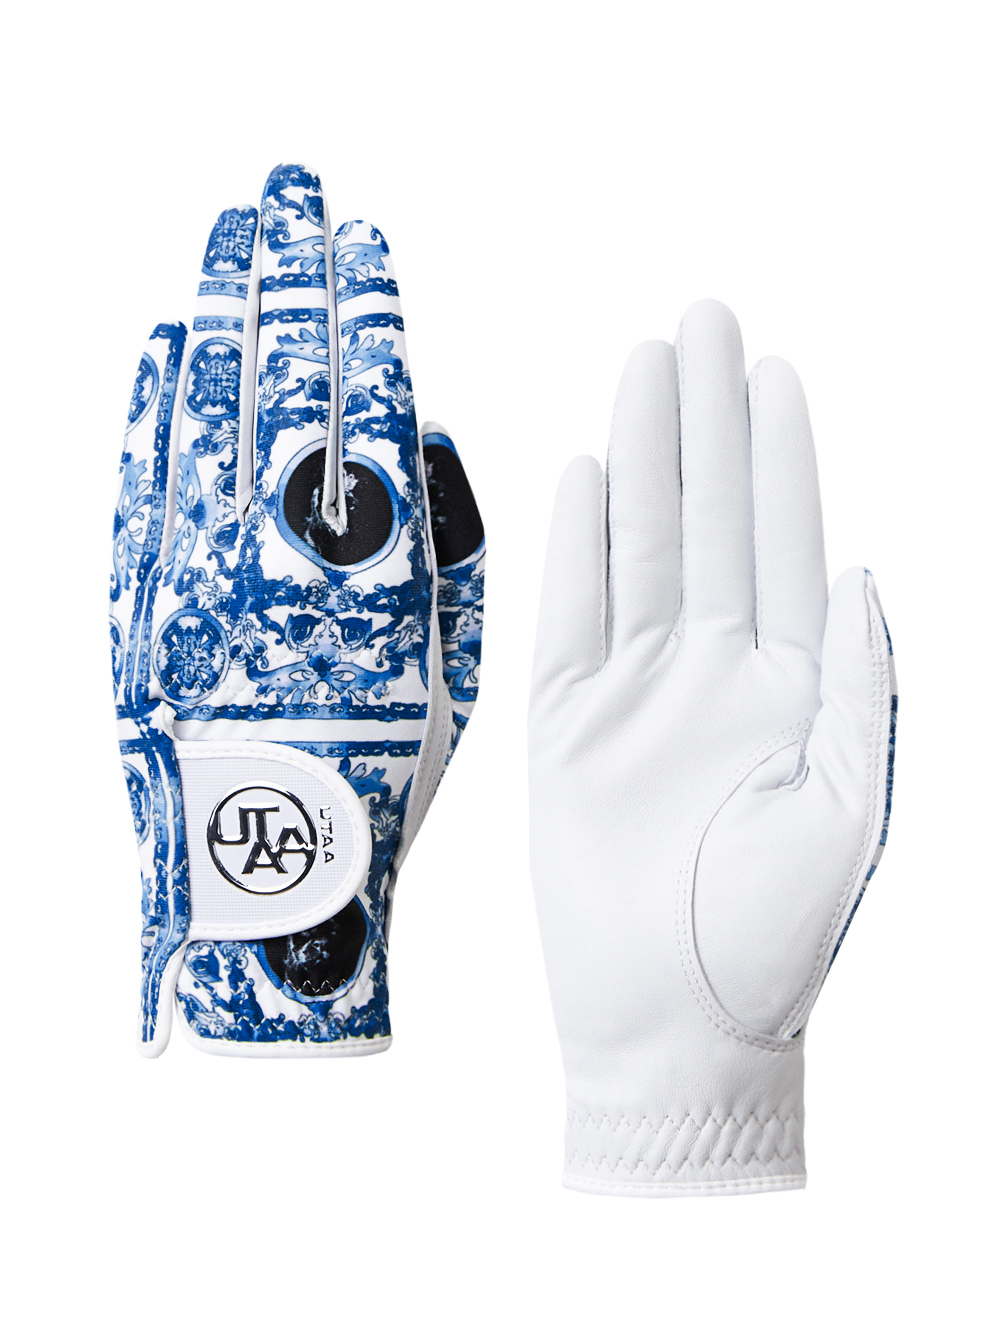 UTAA Sequence Baroque Graphic Golf Gloves : Women&#039;s Blue (UD0GVF495BL)